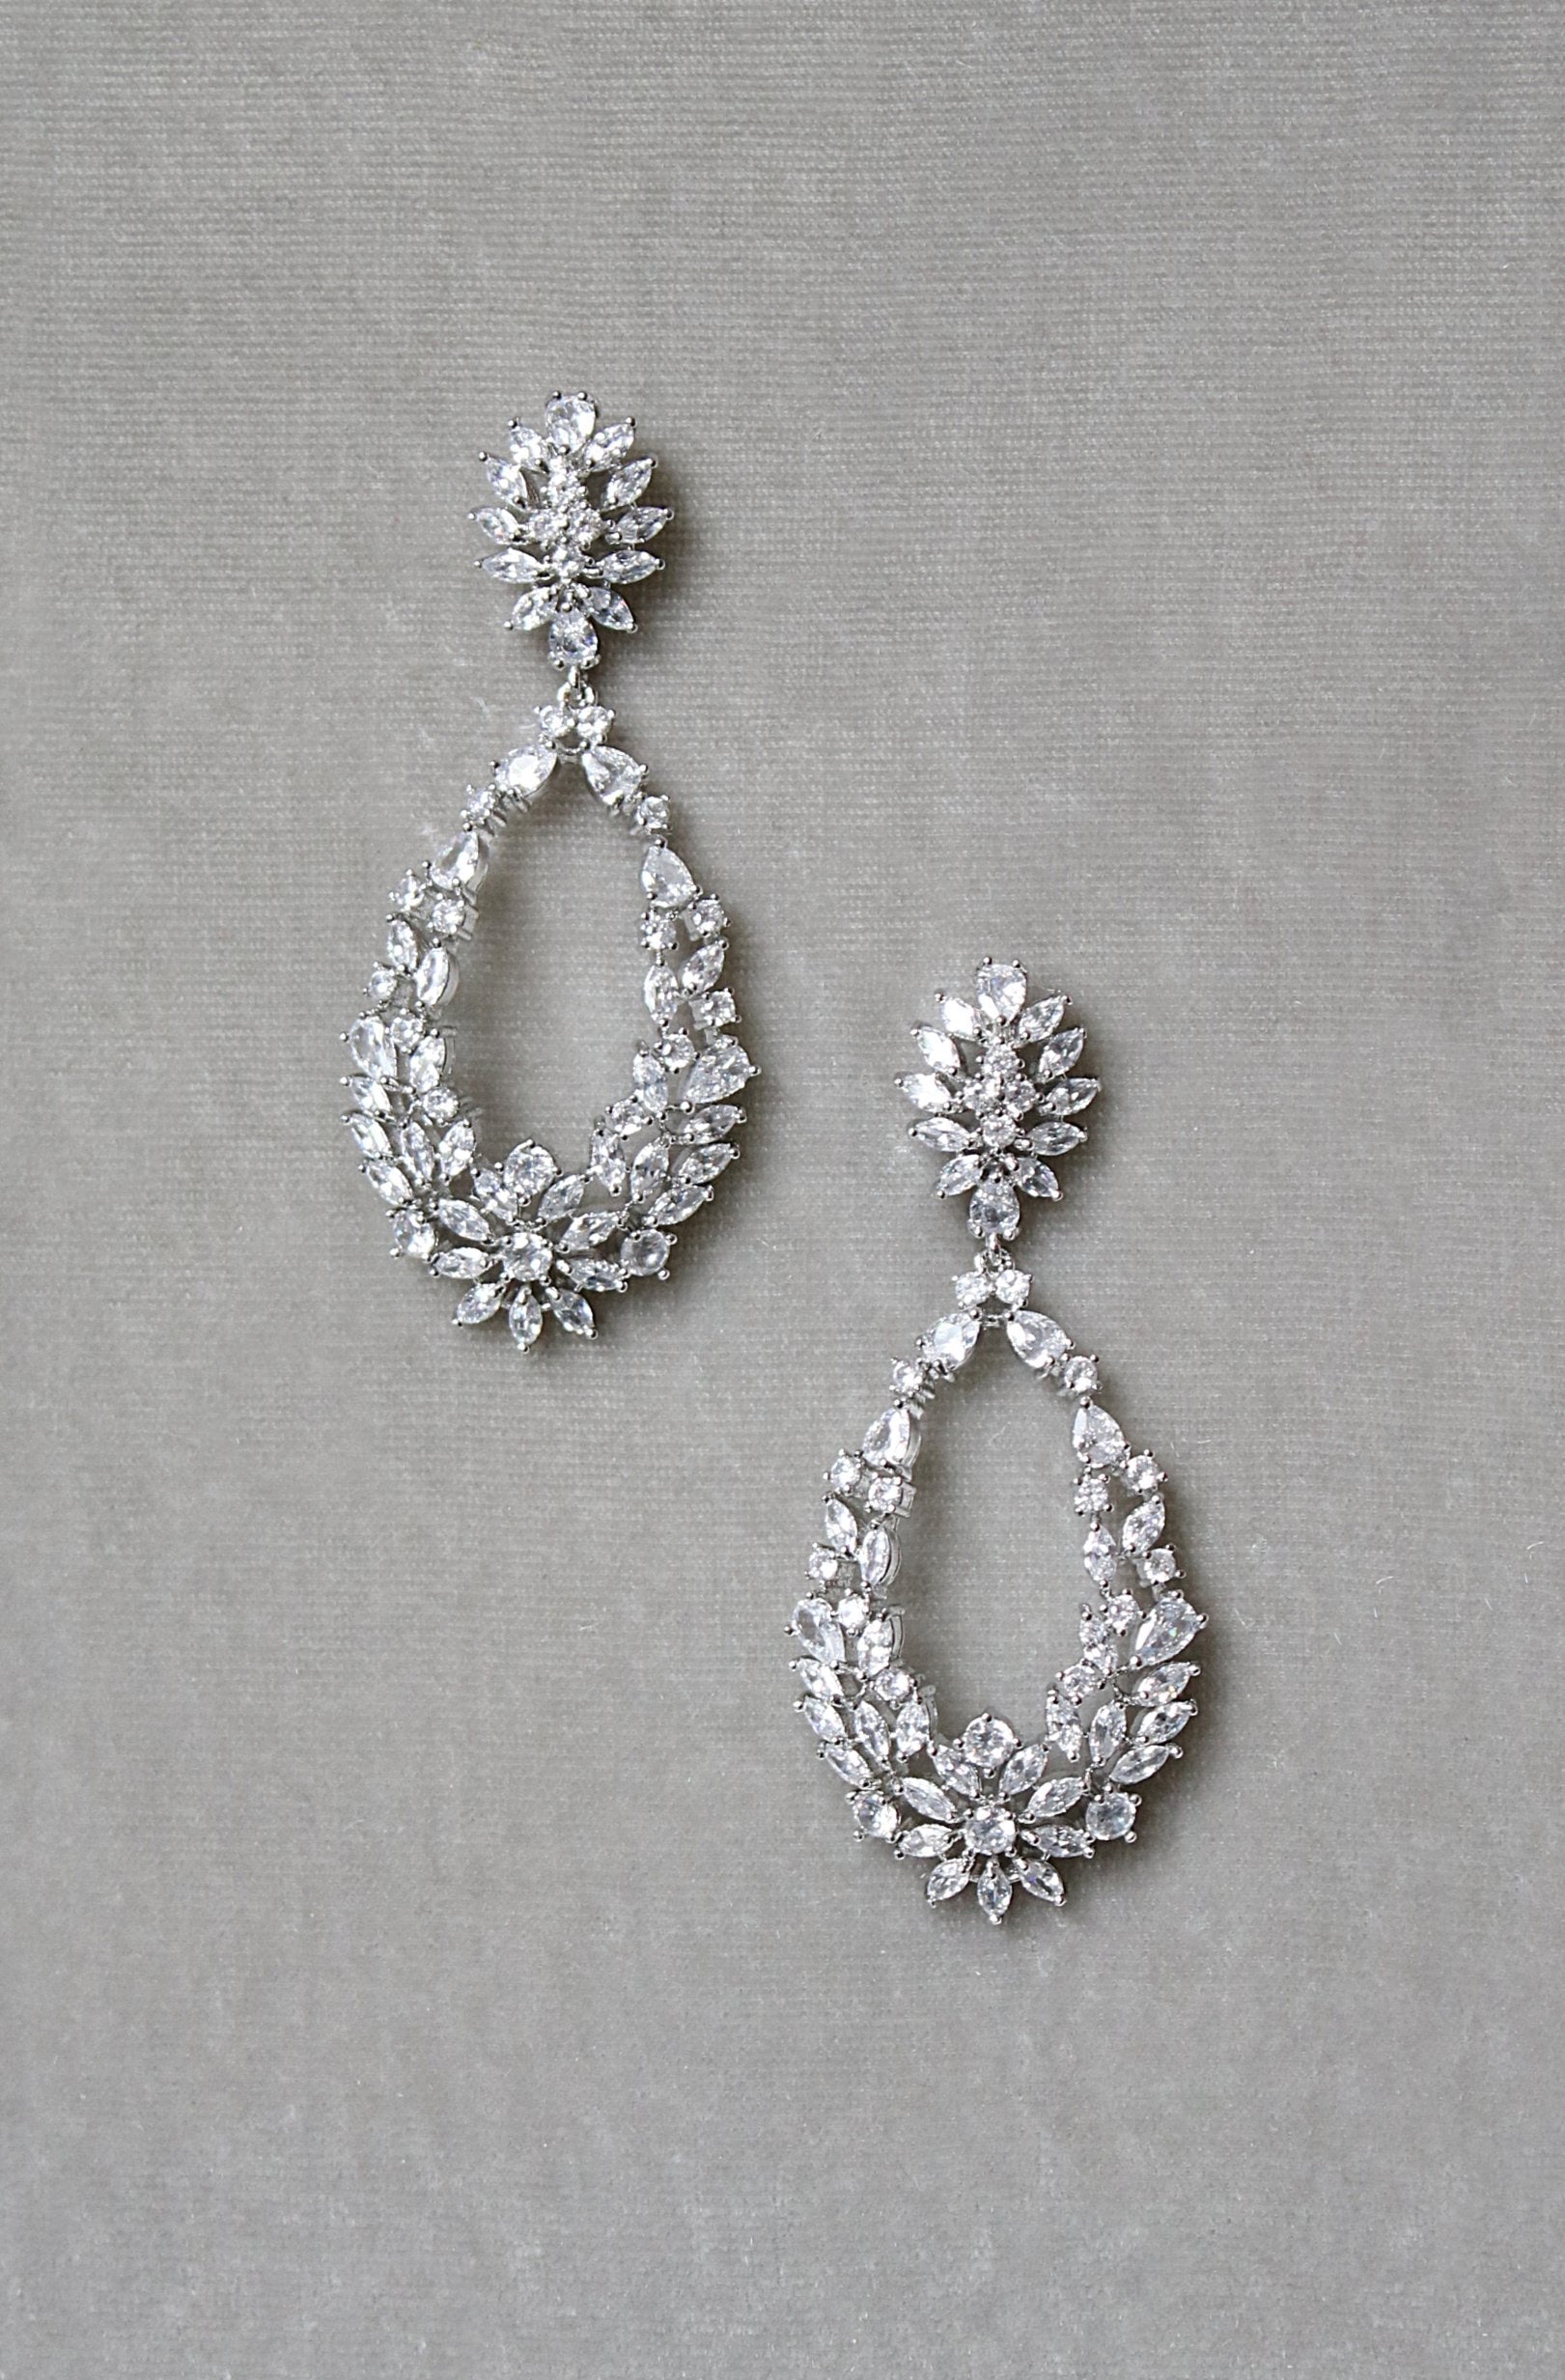 20 Wedding Statement Earrings for All of Your Bridal Events